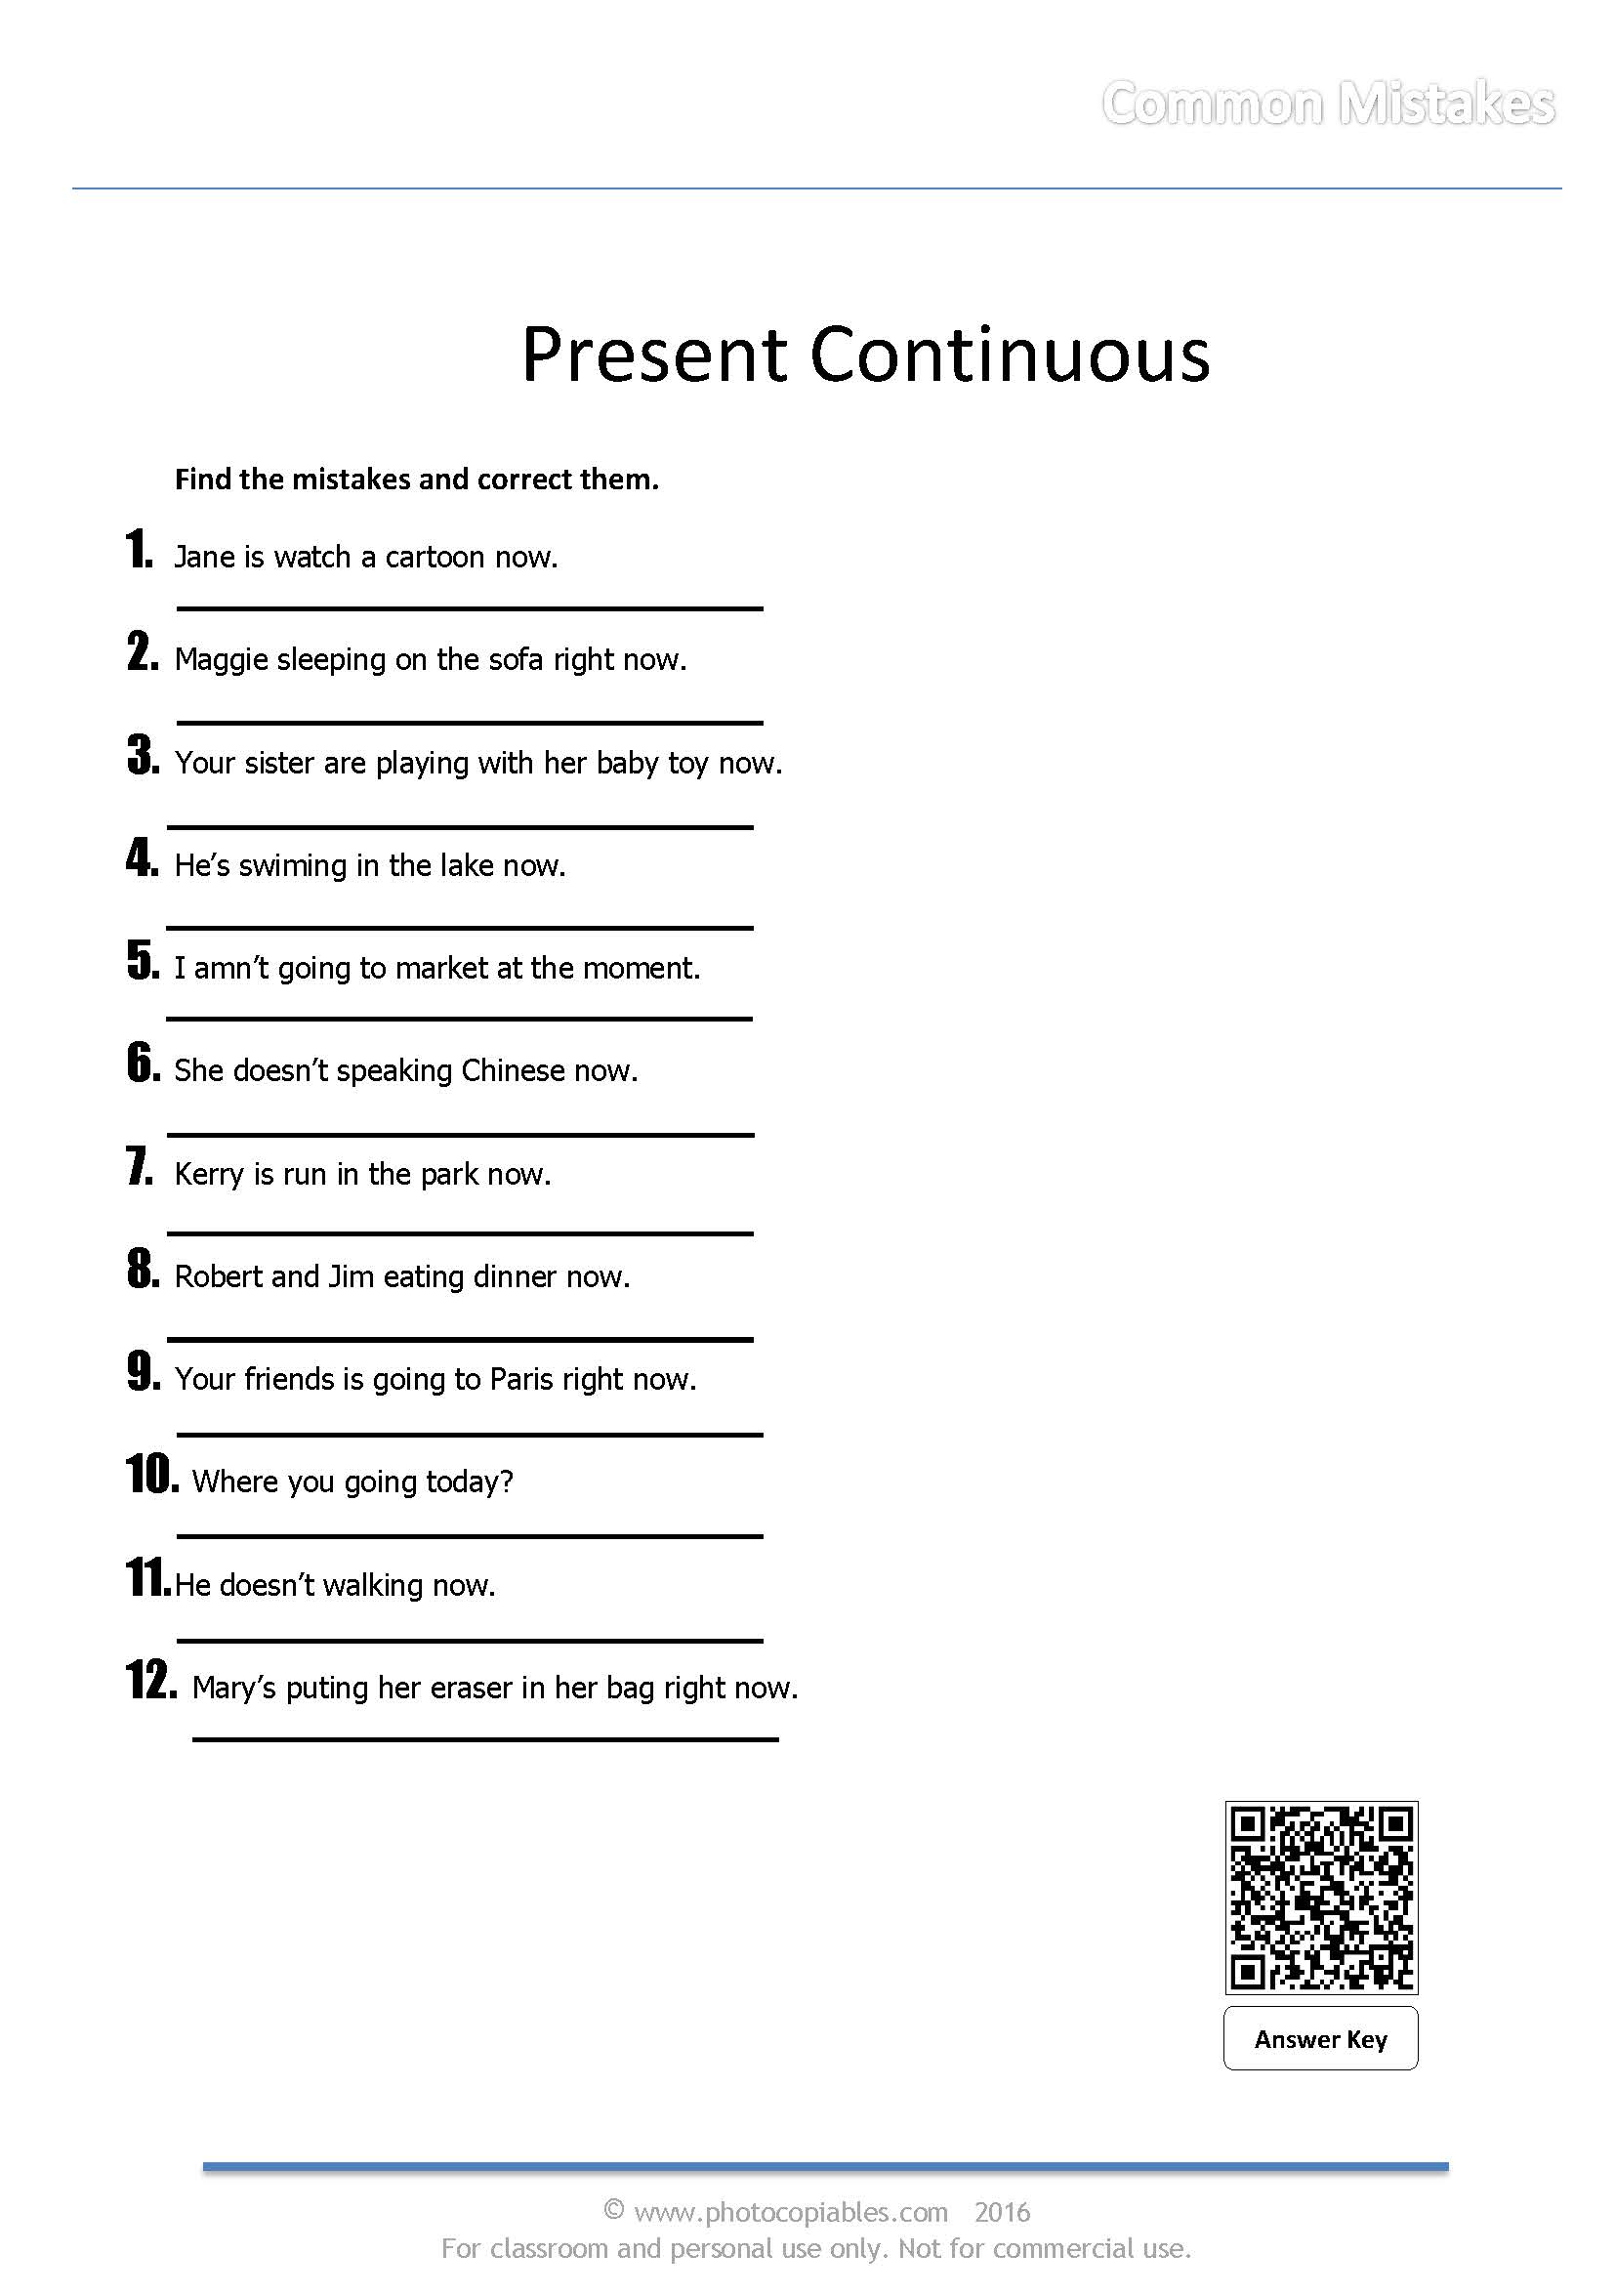 present-continuous-common-mistakes-photocopiables